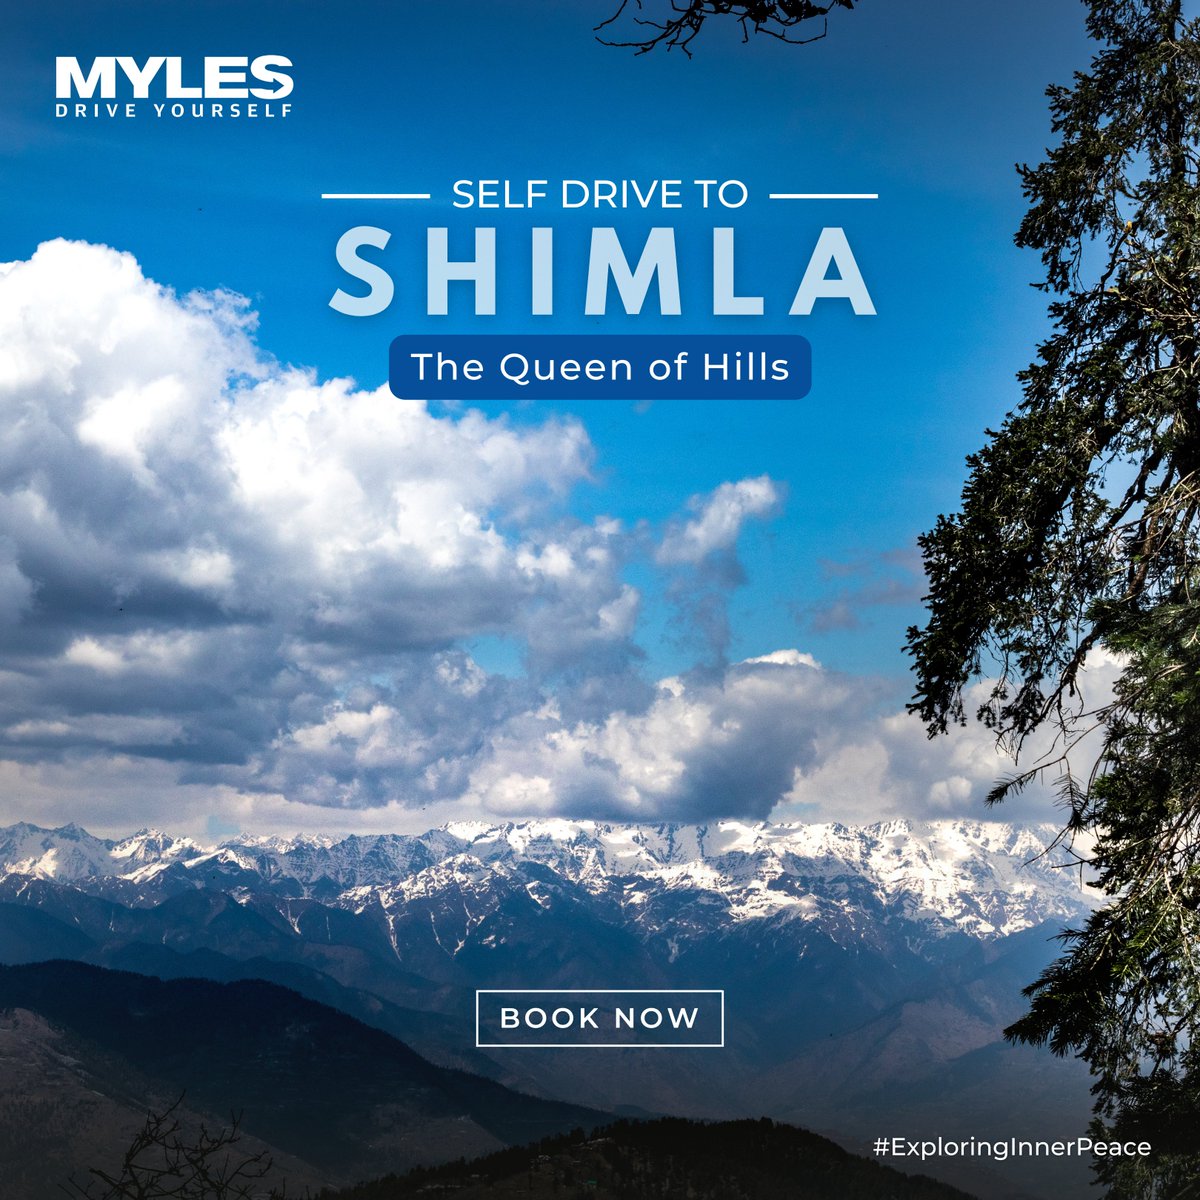 Shimla: The Queen of Hills!🏔🚗
#Shimla #Selfdrive #Mylescars
Book Now> mylescars.com
#travel #picoftheday #carsubscription #trendsetter #sustainable #flexible #travelwithMyles #SelfDrive #secondhand #carsoninstagram #carswithoutlimits #carstagram #Myles #newcar #cars